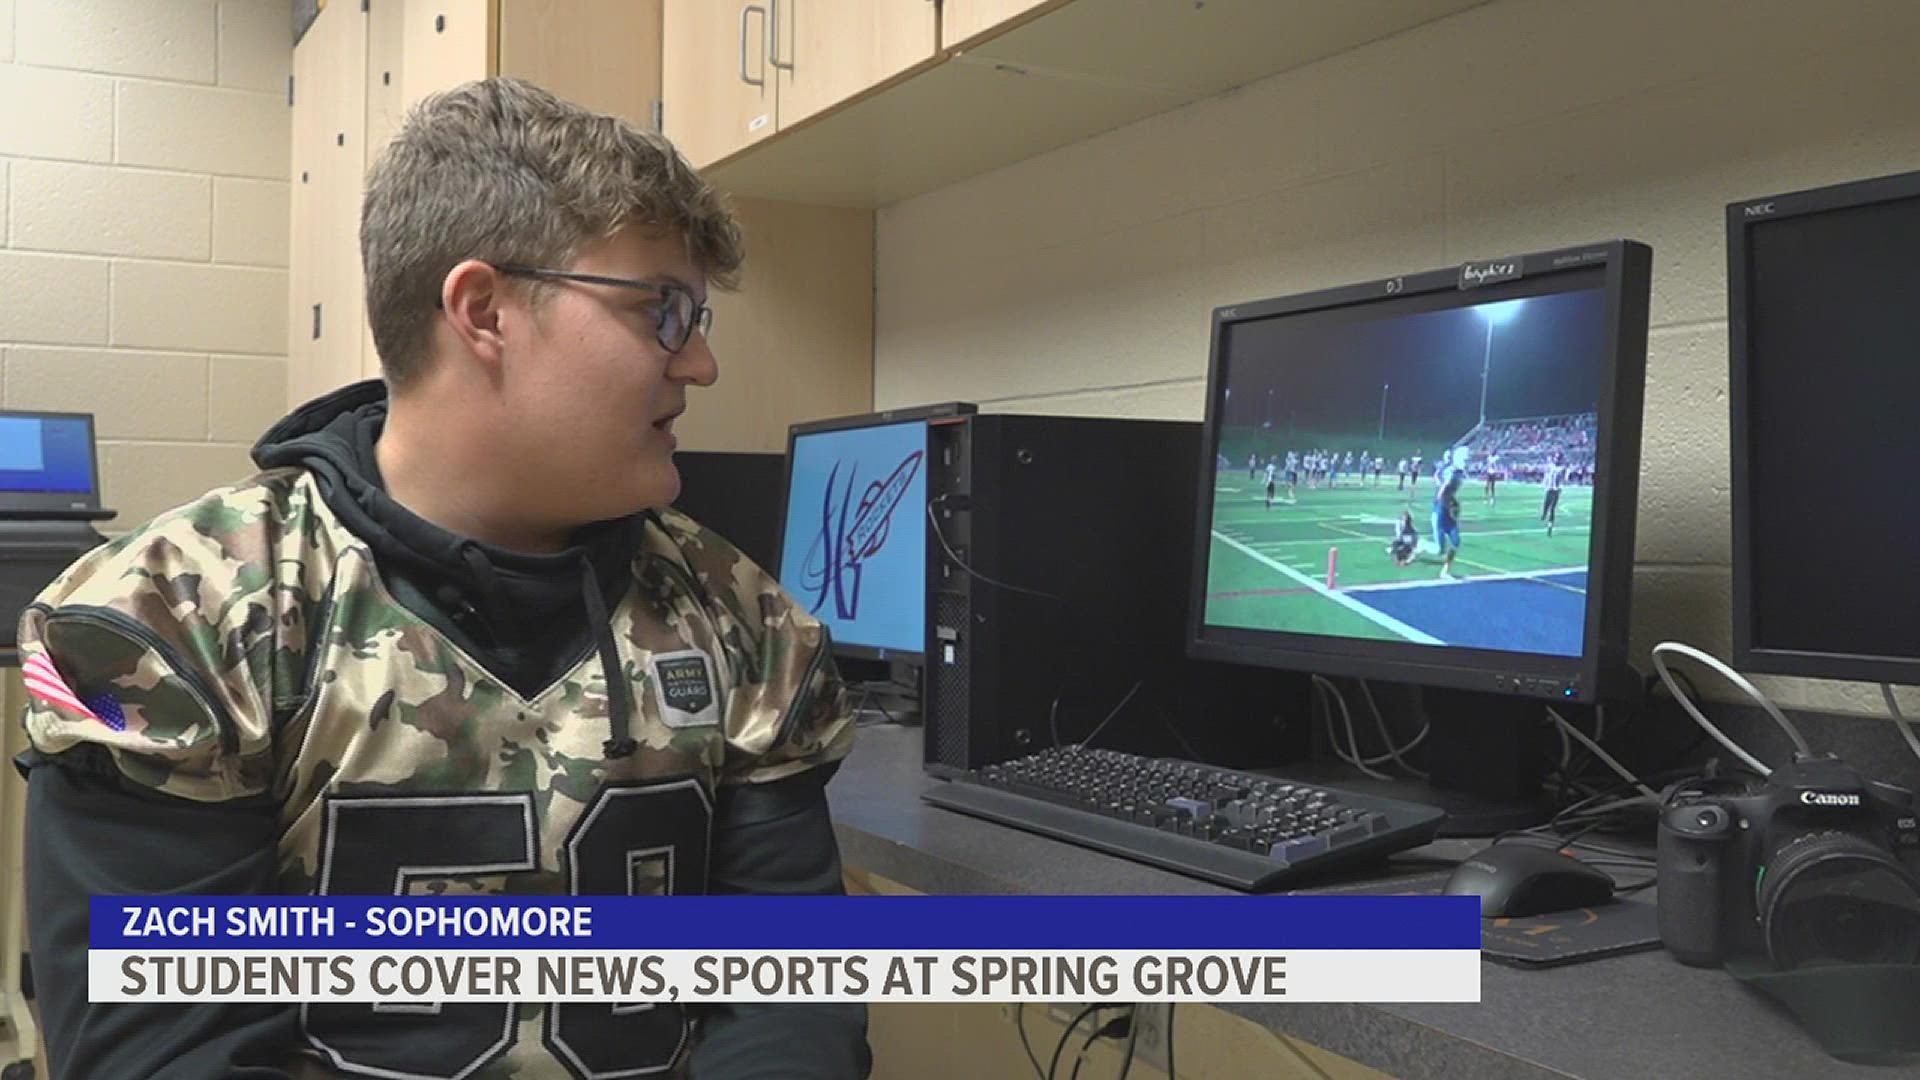 BEHIND THE SCENES OF EVERY SPORTING EVENT AND ANY BIG NEWS AT SPRING GROVE HIGH SCHOOL IN YORK COUNTY ARE THE ADVANCED VIDEO JOURNALISM STUDENTS DOCUMENTING IT ALL.